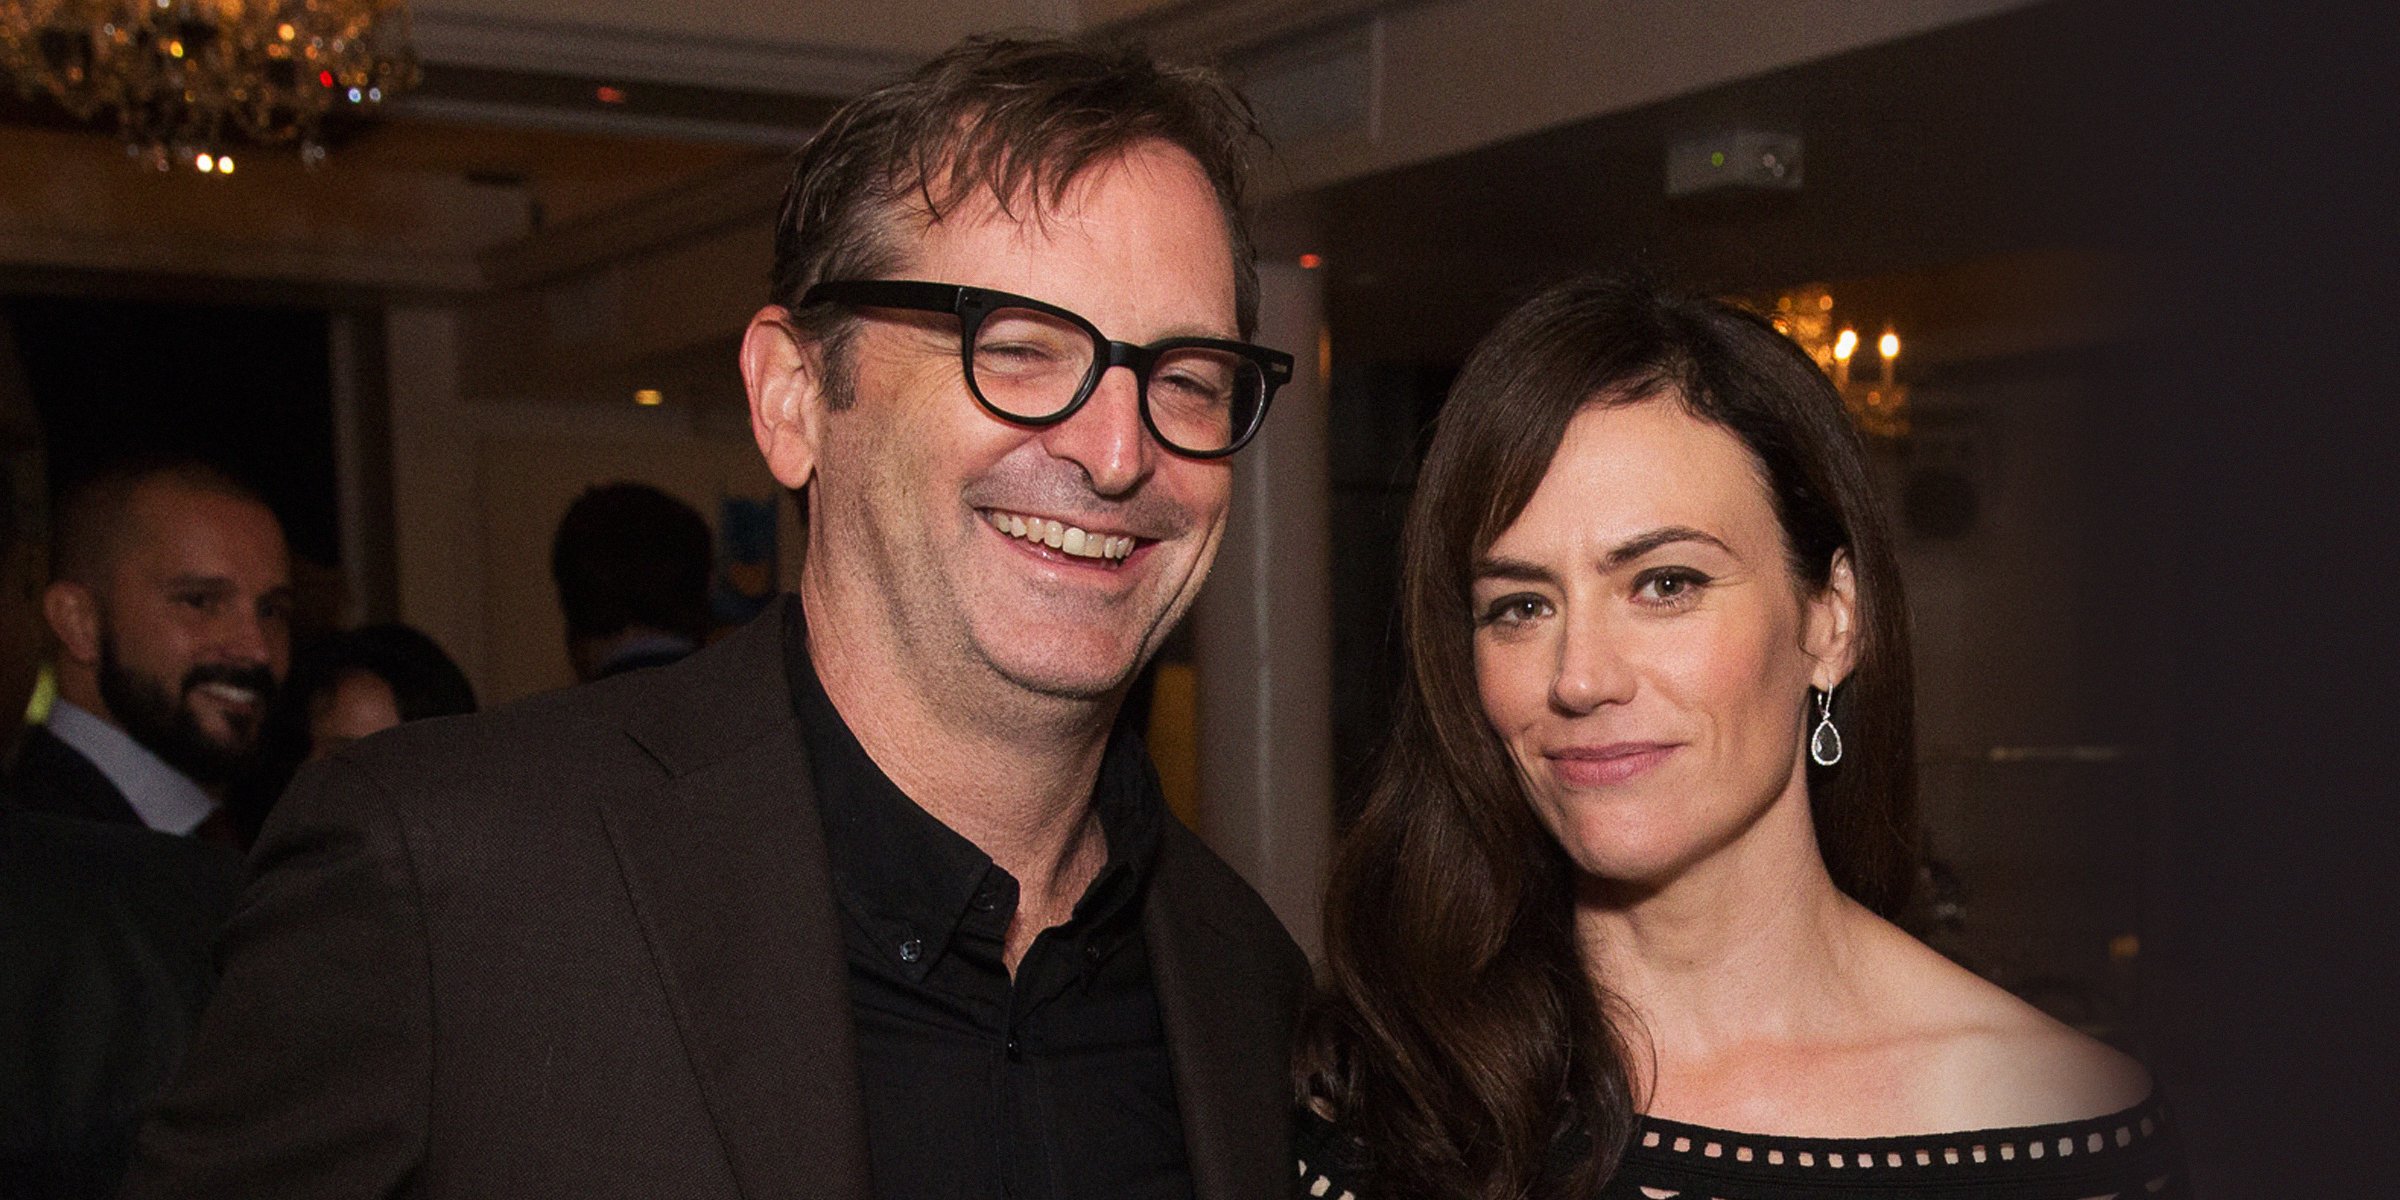 Paul Ratliff Is a Licensed Family Therapist and Maggie Siff's Husband